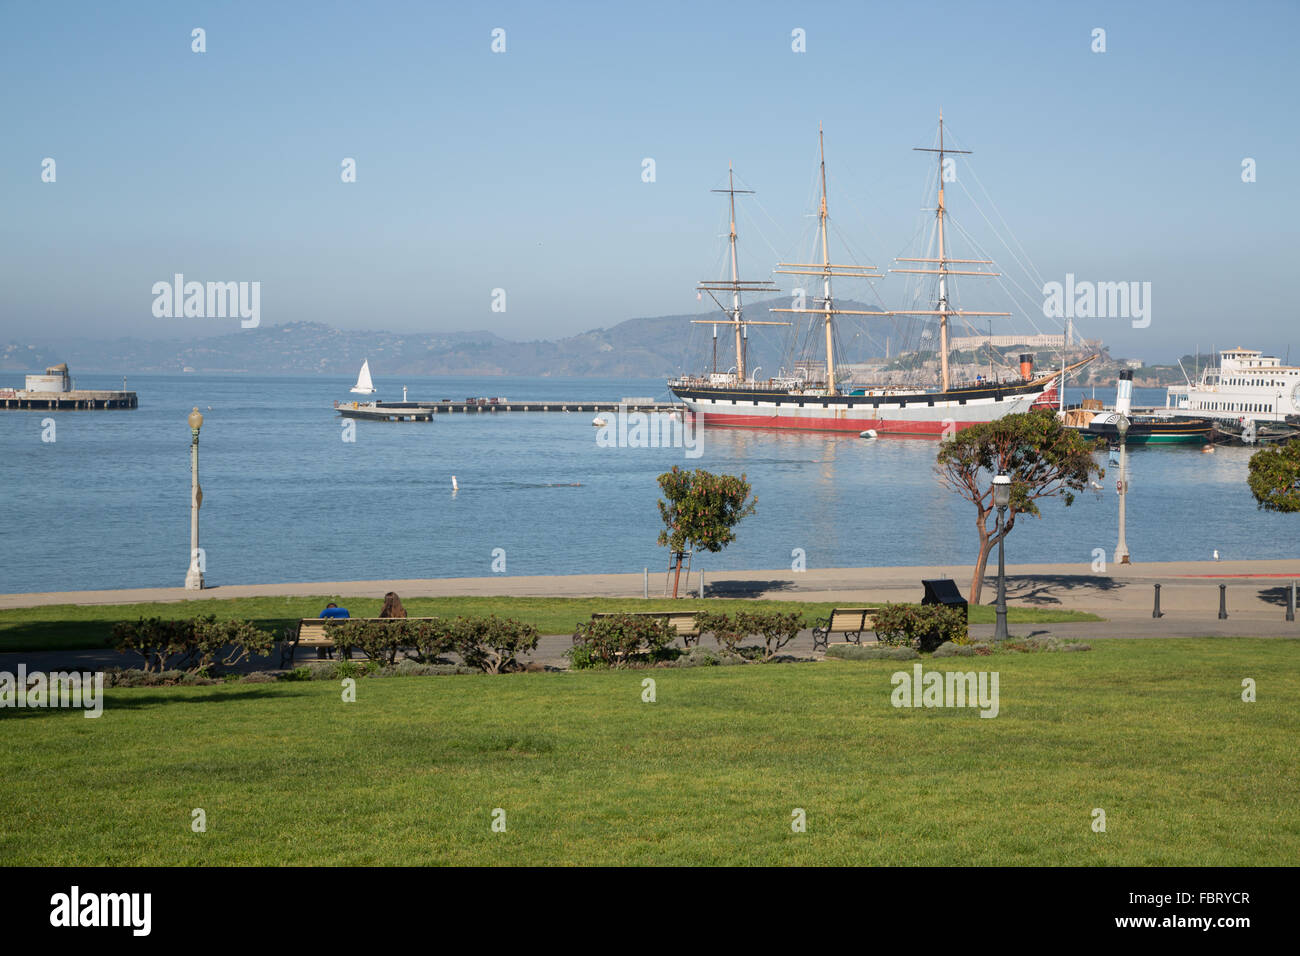 View of a ship in San Francisco's port. Stock Photo